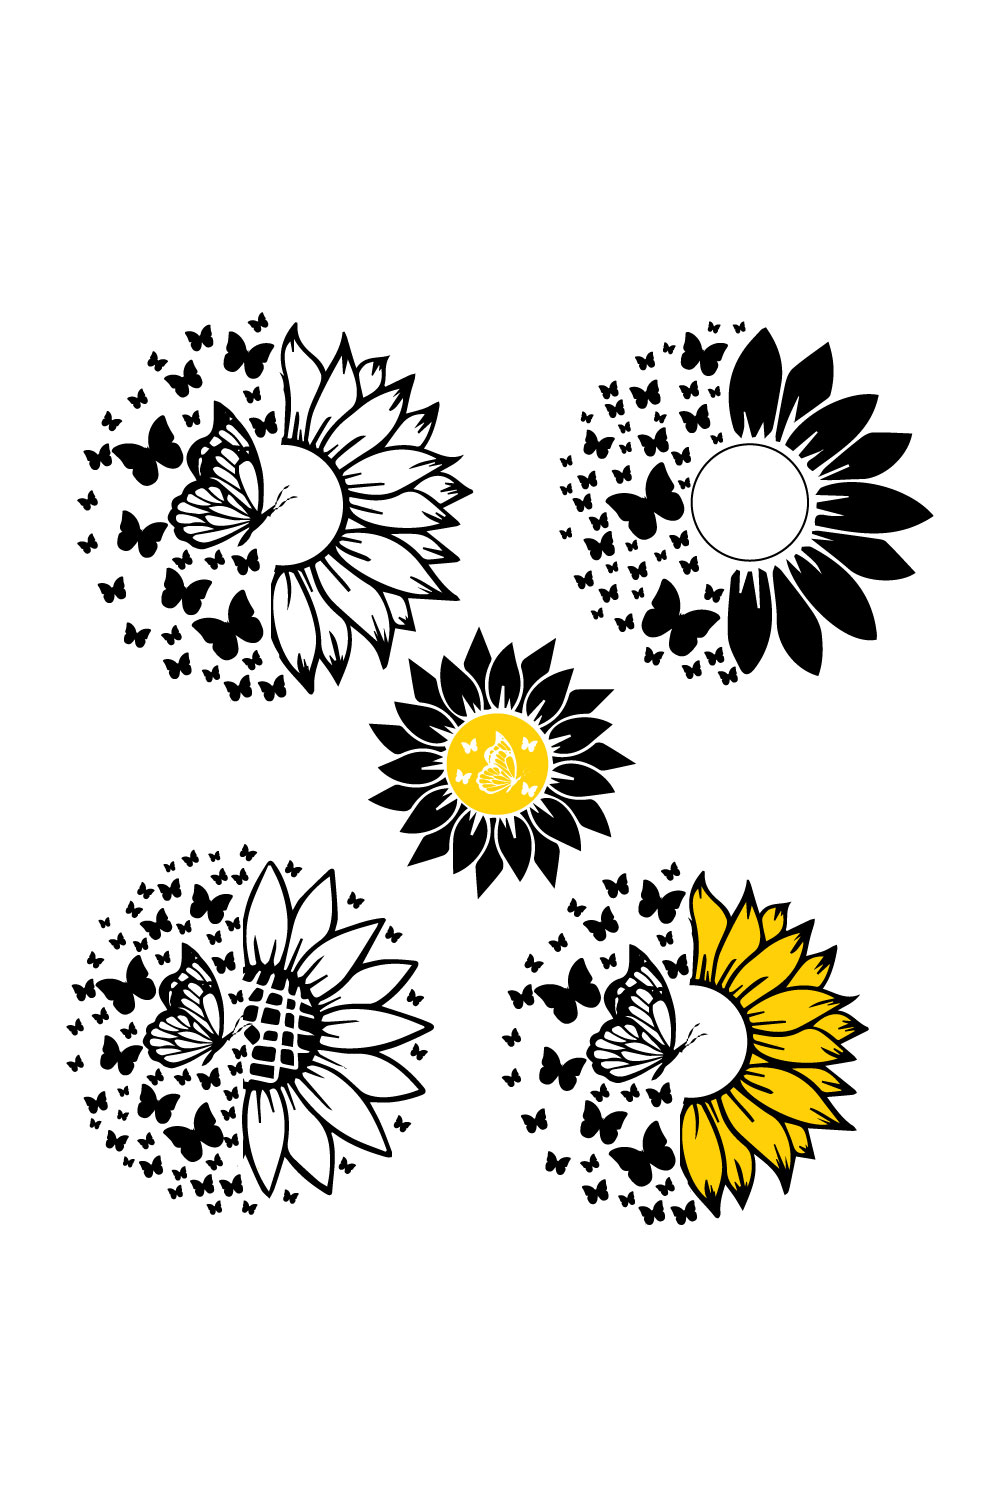 Pack of adorable images of sunflower flowers